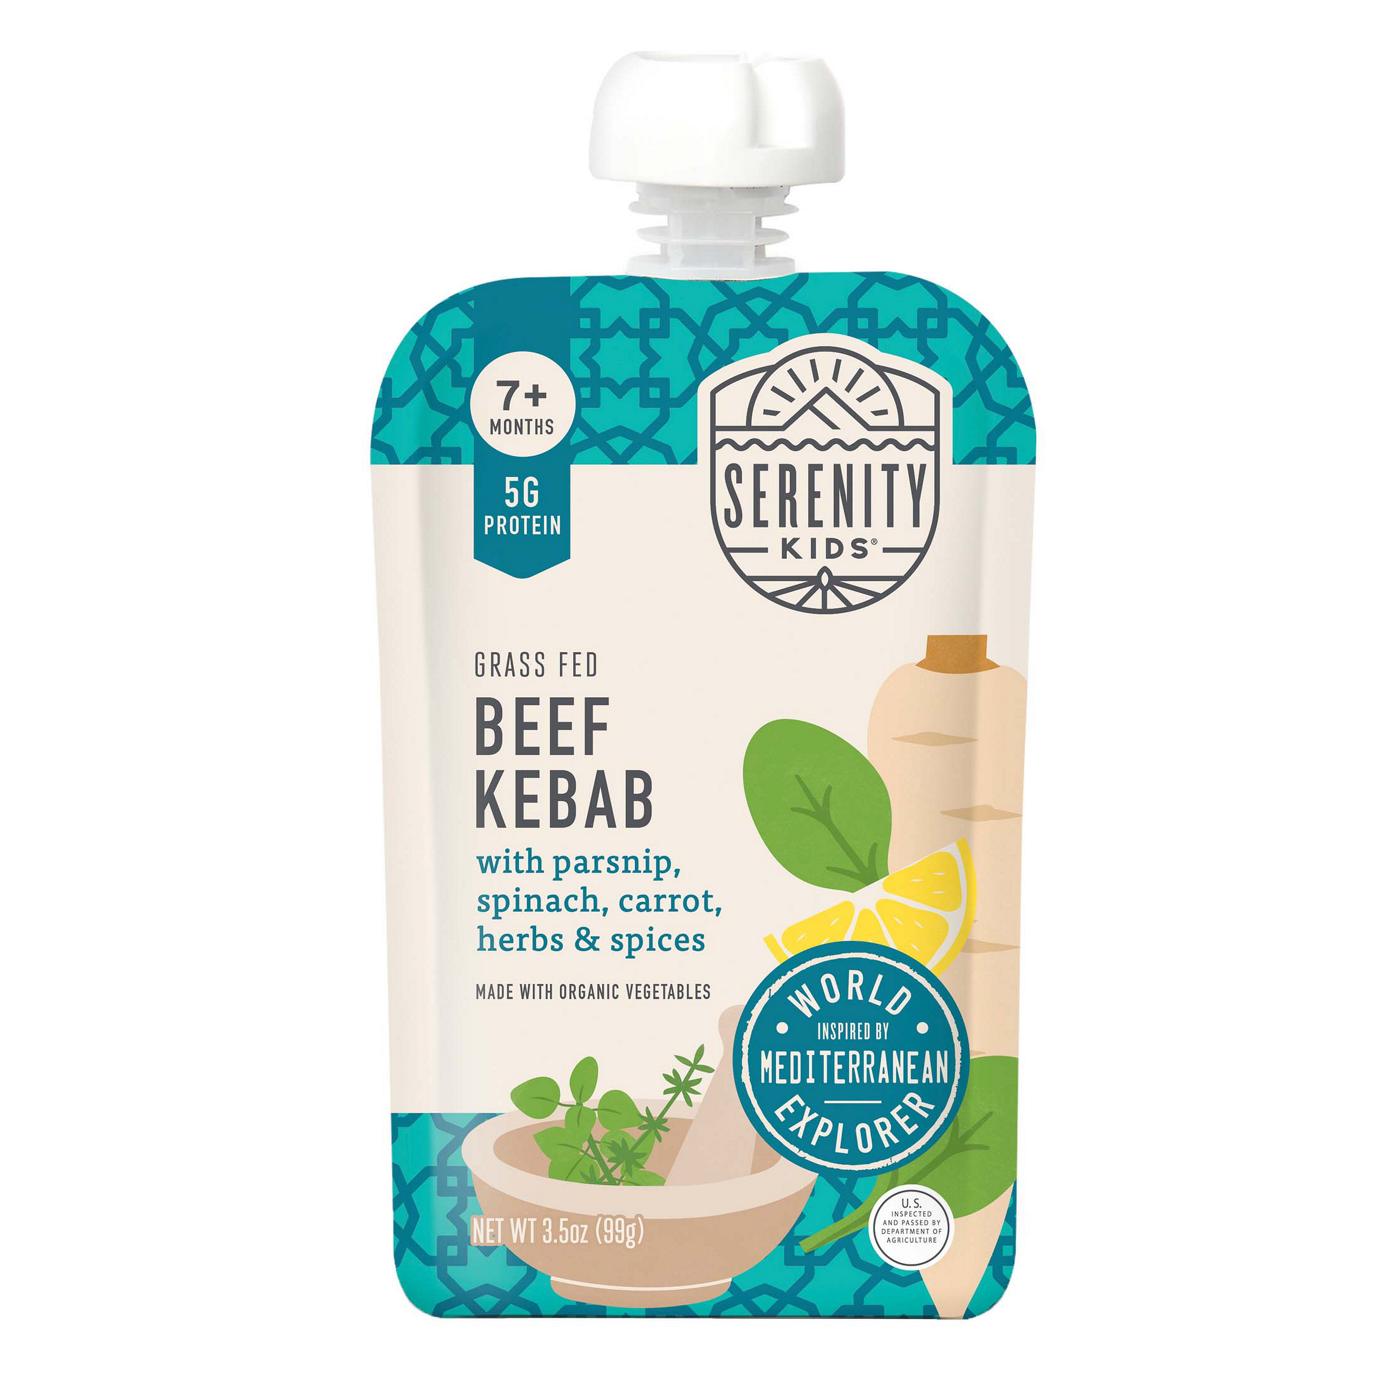 Serenity Kids Baby Food Pouch - Grass Fed Beef Kebab; image 1 of 2